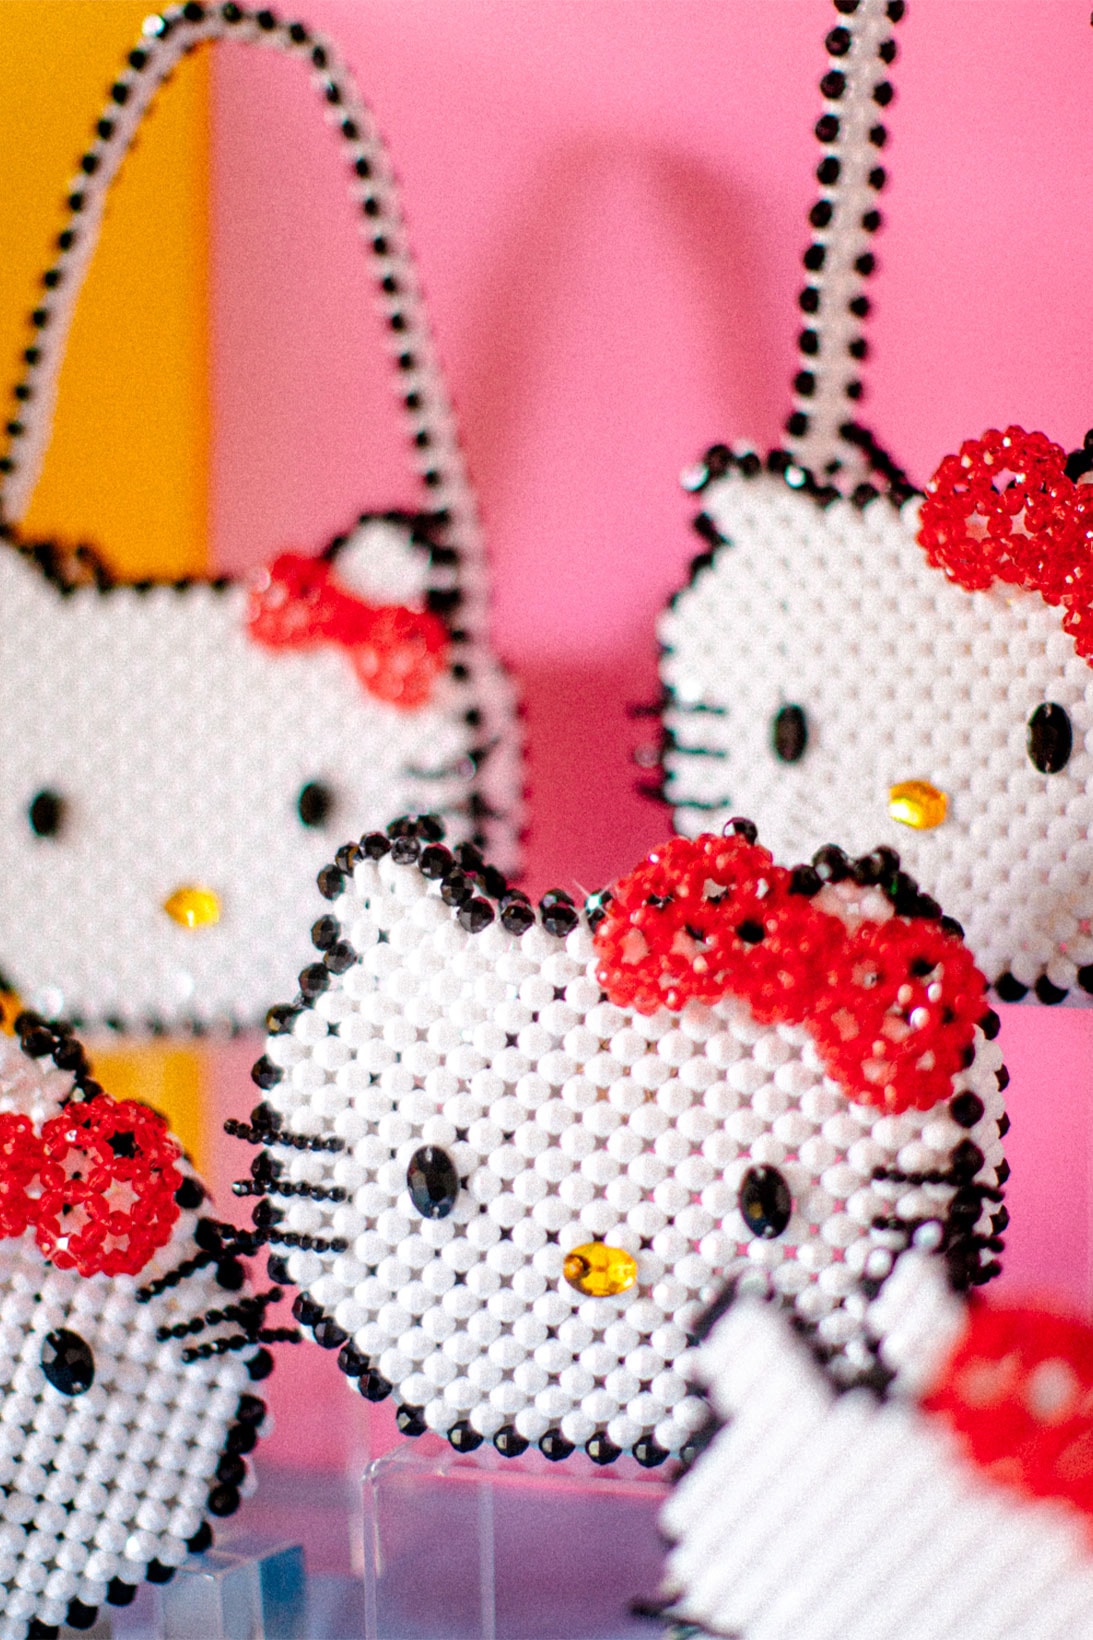 Introducing Our New Range of Hello Kitty Charms